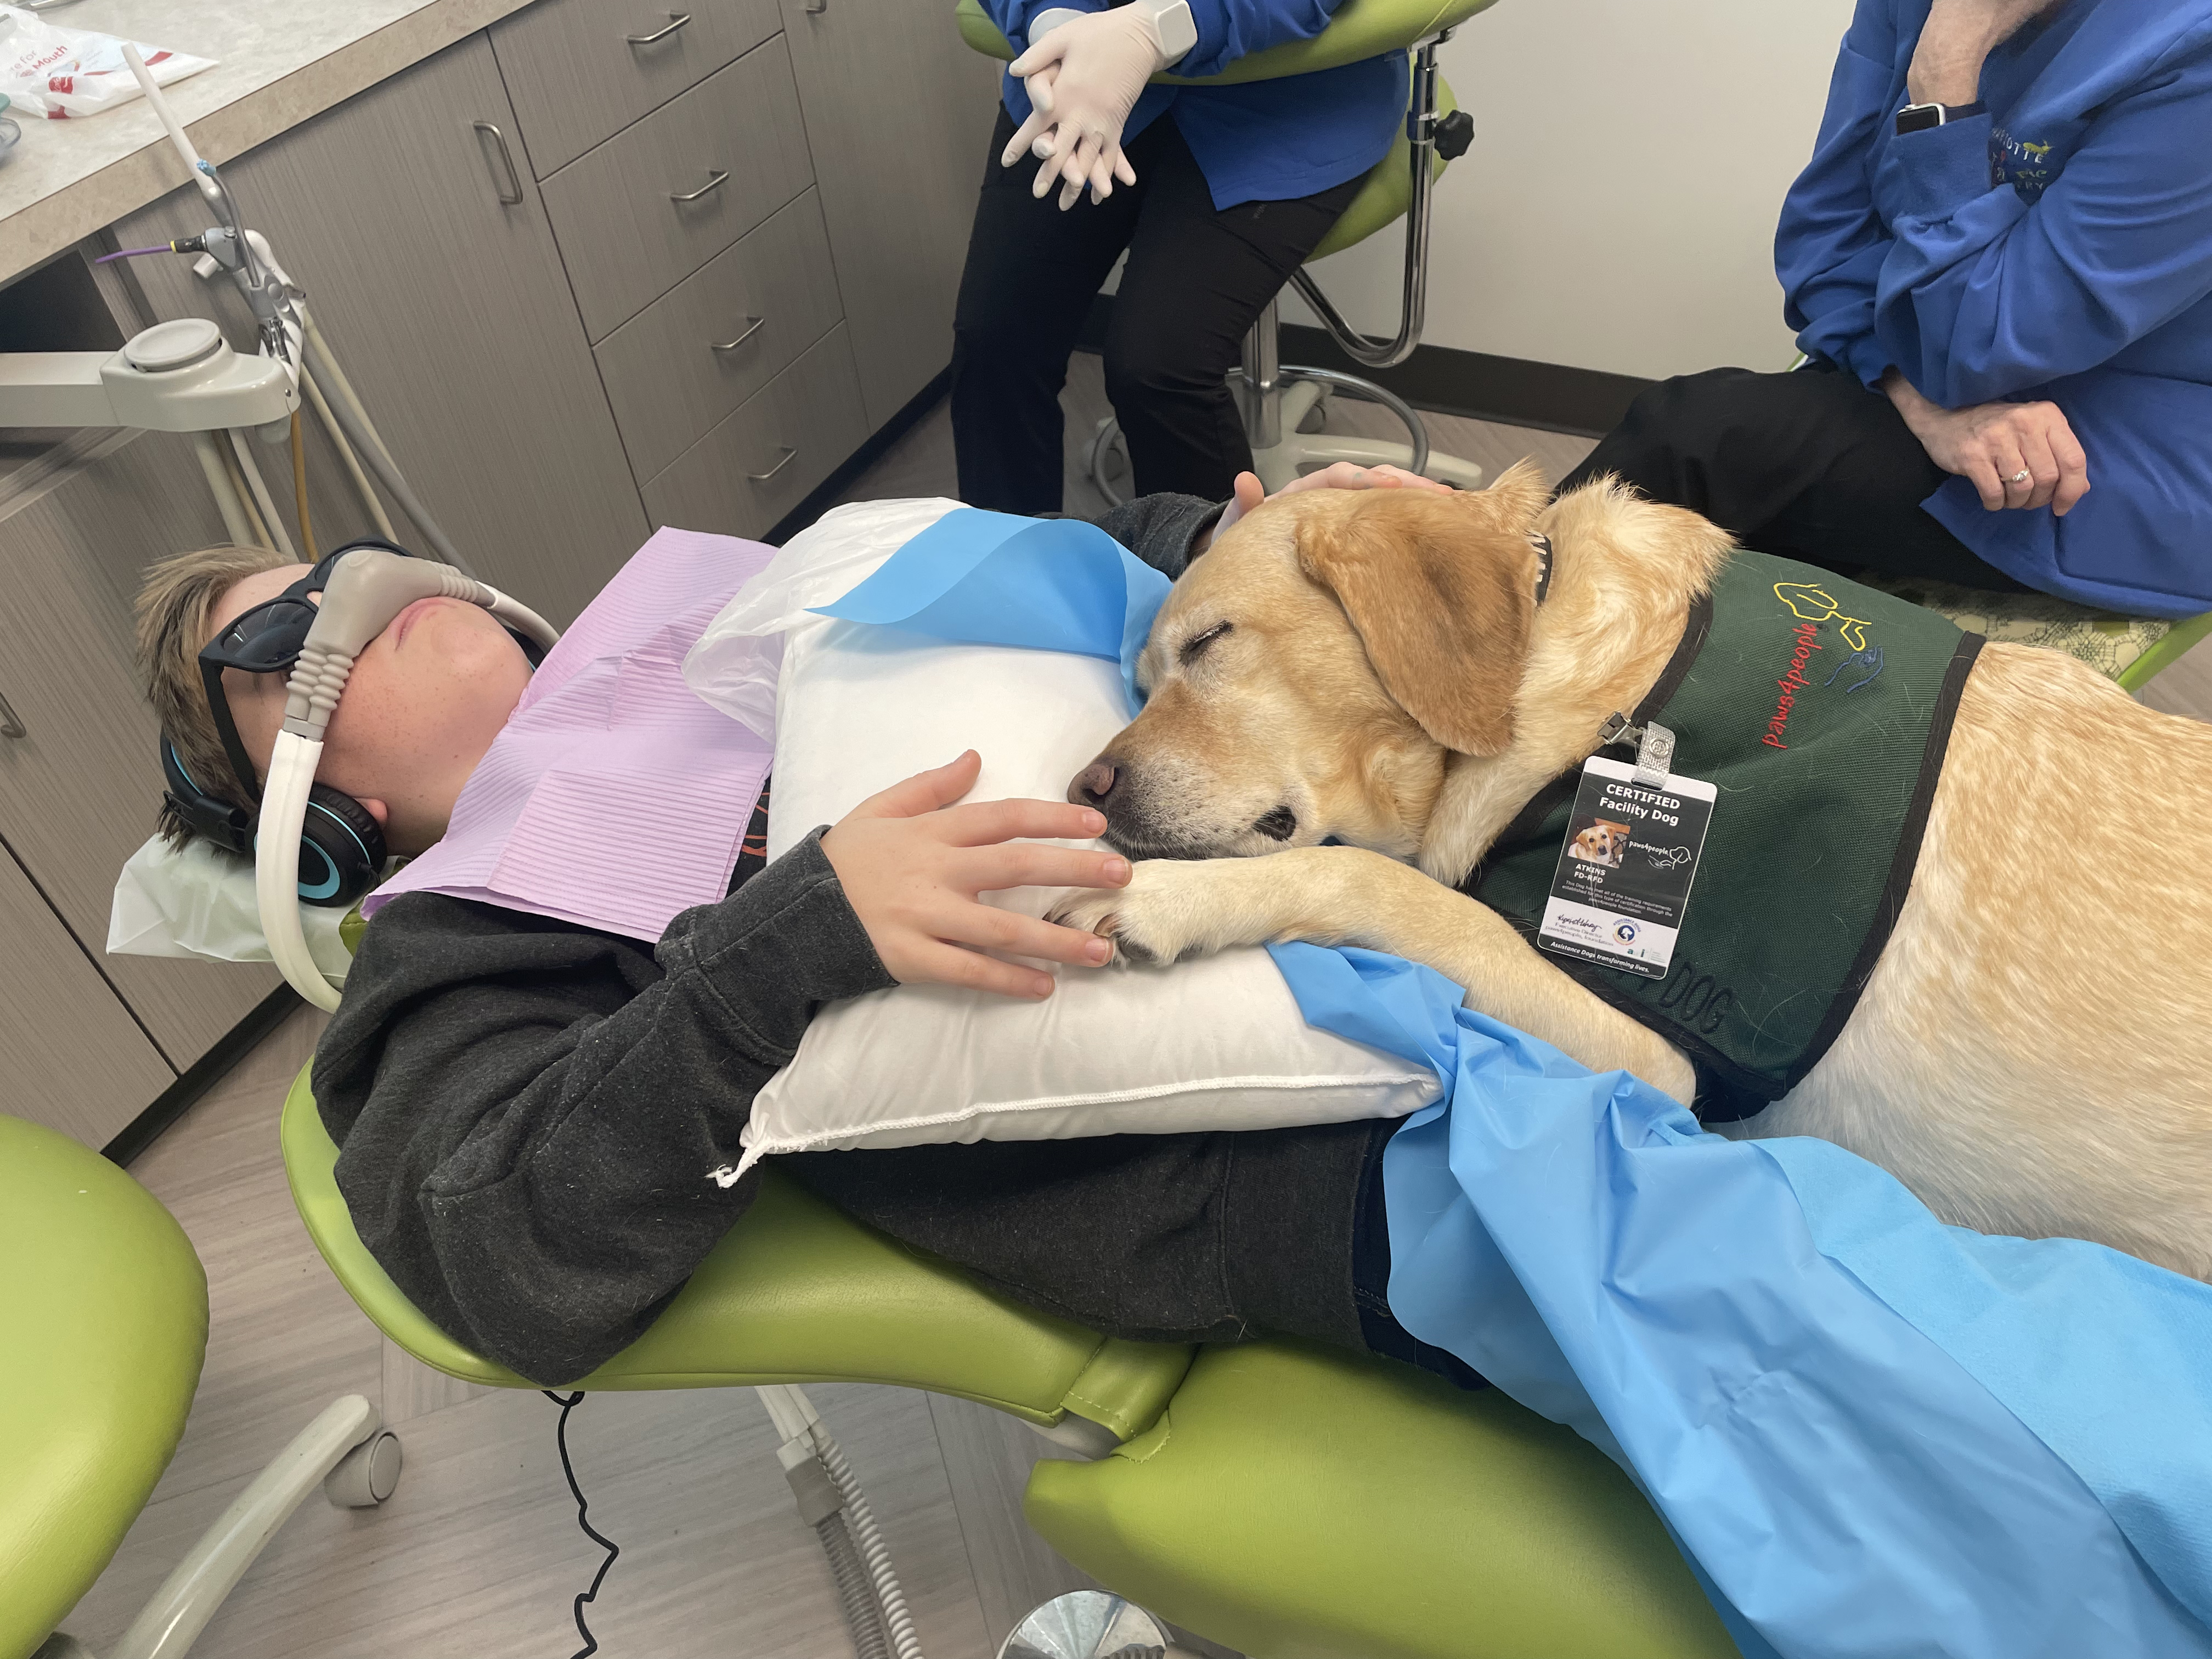 A Canine Day on the Dentist’s: North Carolina Regulates Pups in Dentistry